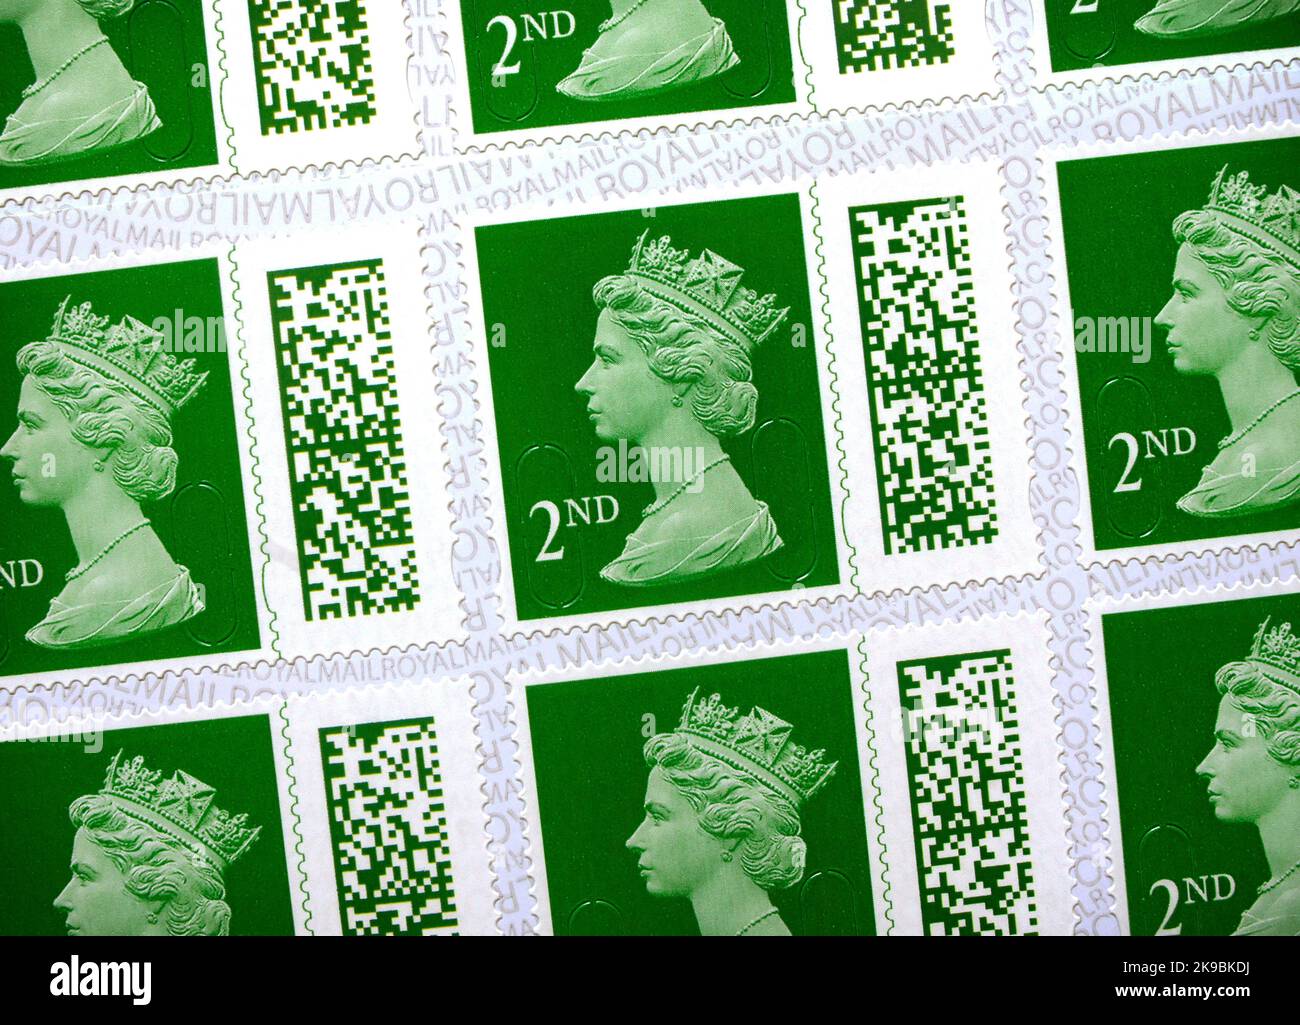 UK 2nd Class Royal Mail postage stamps. New design with a unique barcode introduced Feb 2022. Old non-barcoded stamps only valid up to 31st Jan 2023. Stock Photo